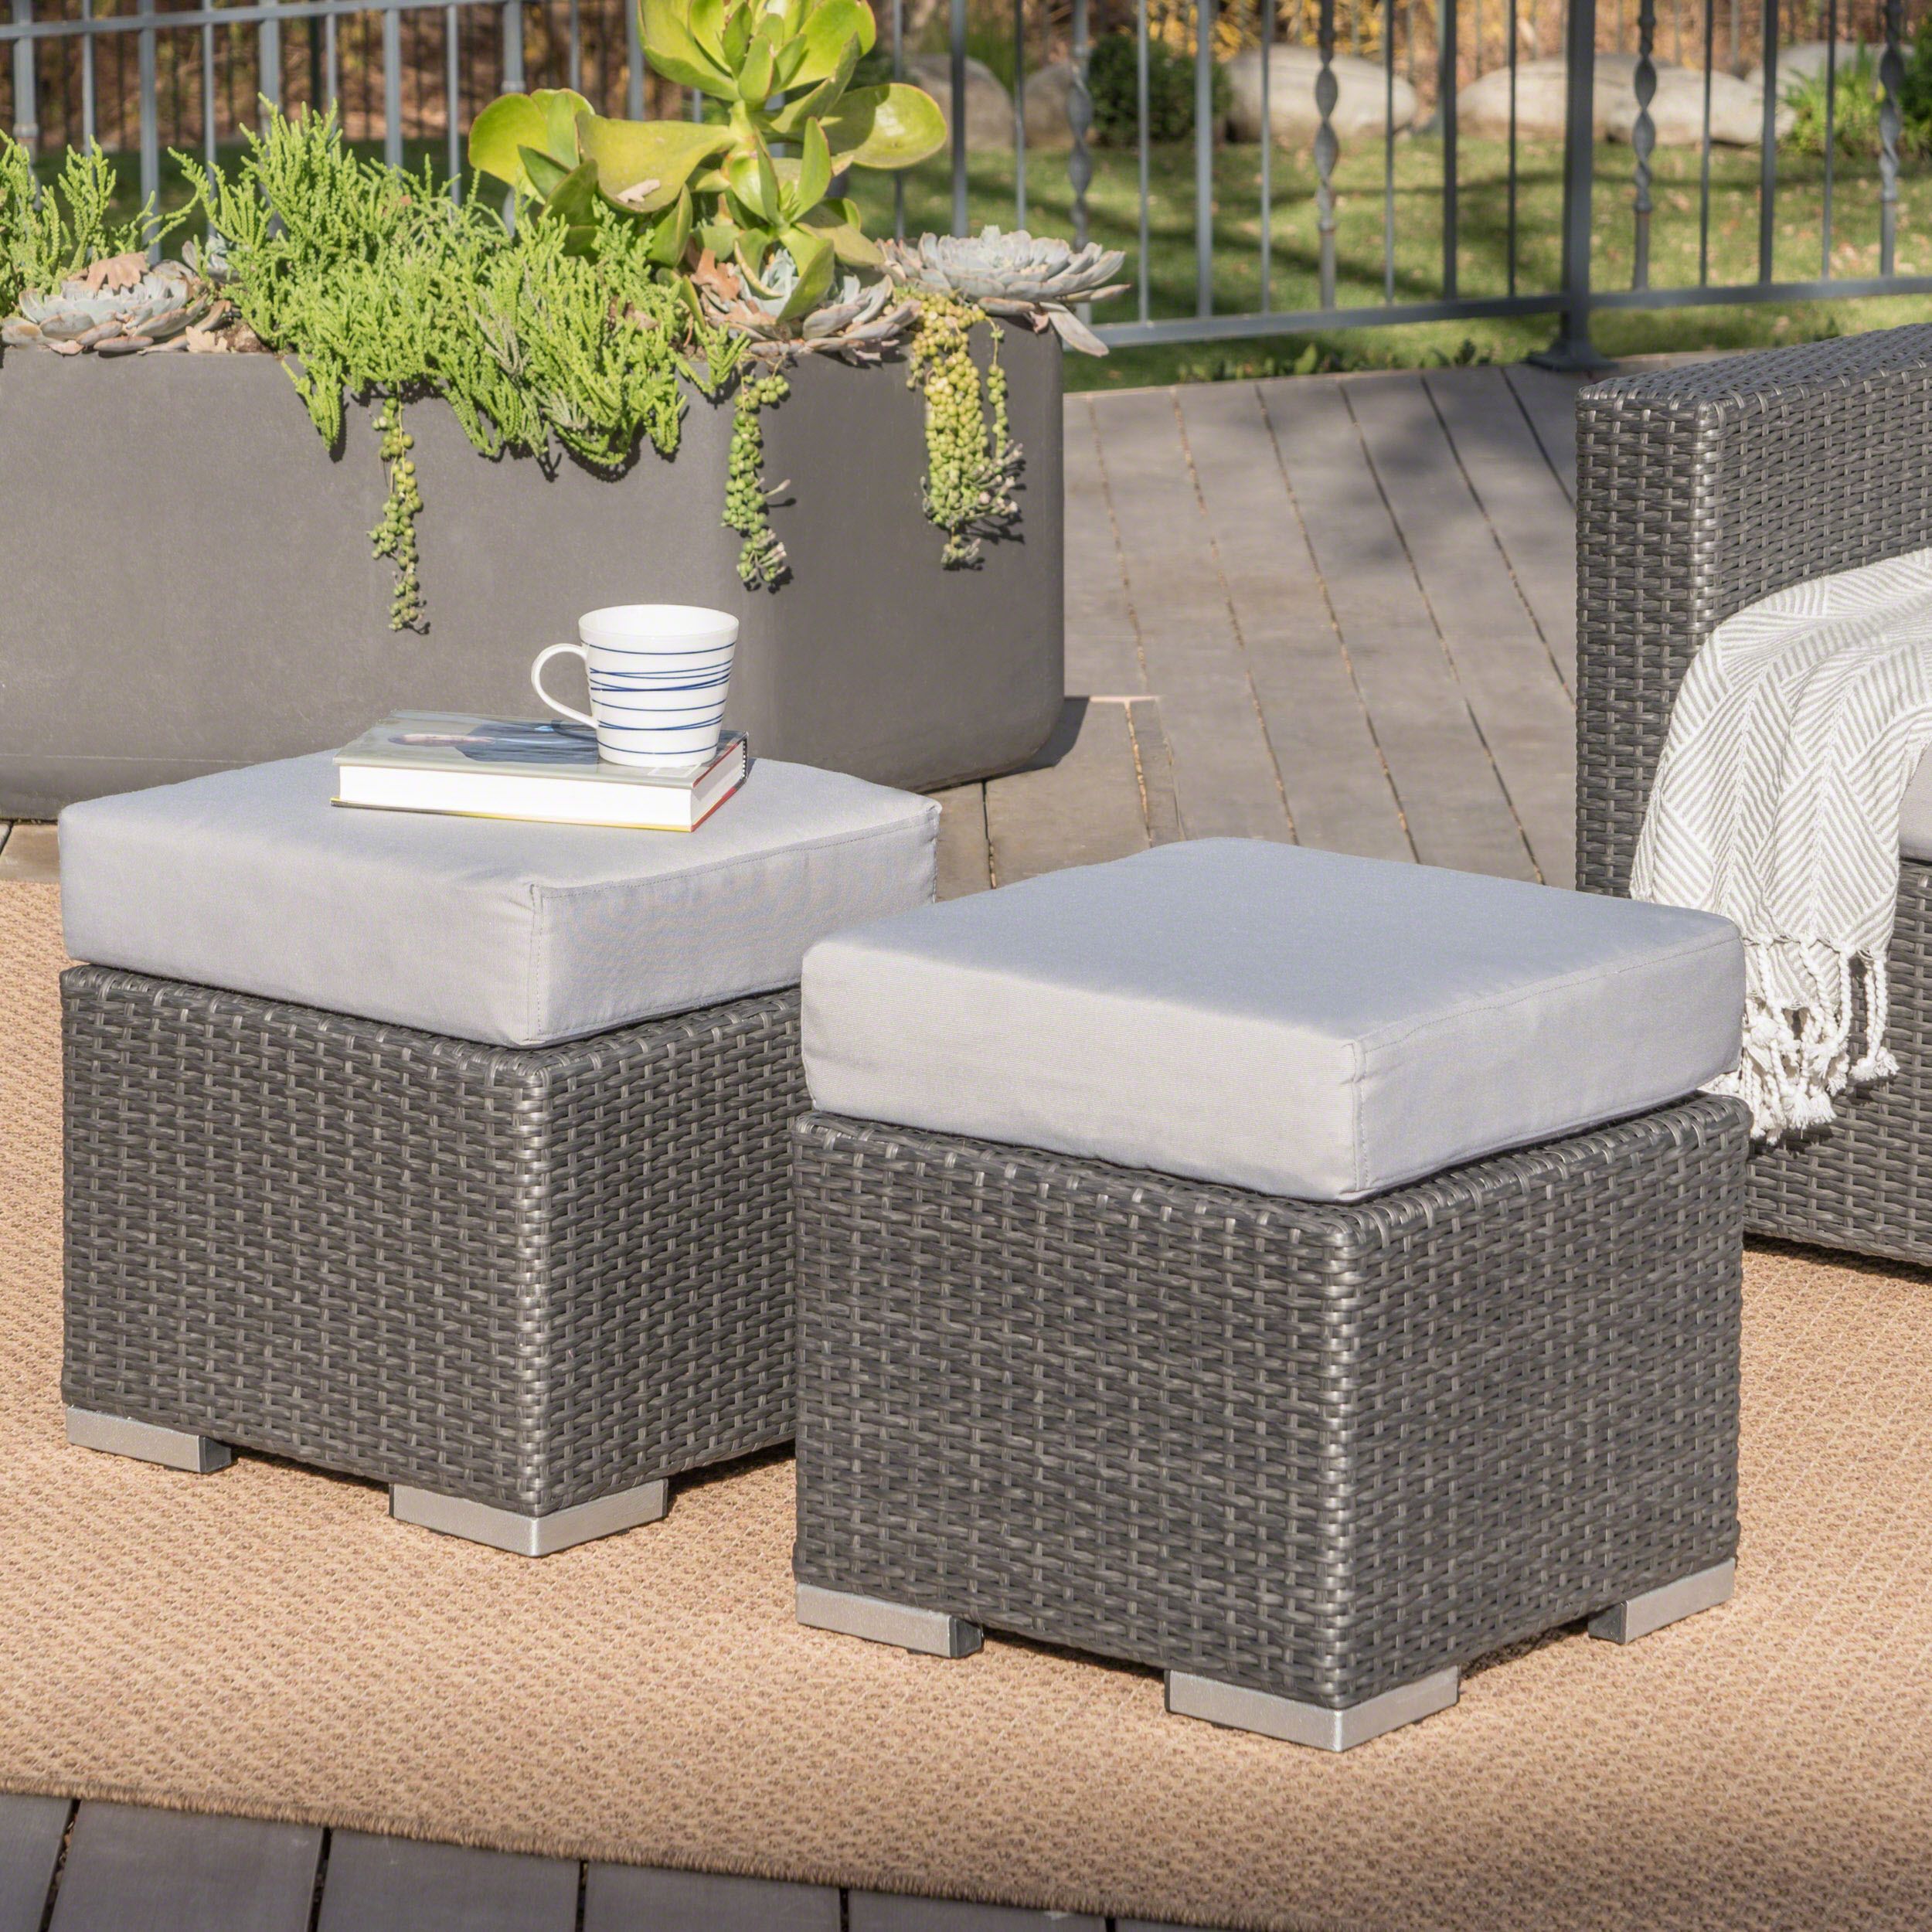 Avianna Outdoor 16 Inch Wicker Ottoman Seat With Cushion, Set Of 2, Grey,  Silver – Walmart With 16 Inch Ottomans (View 14 of 15)